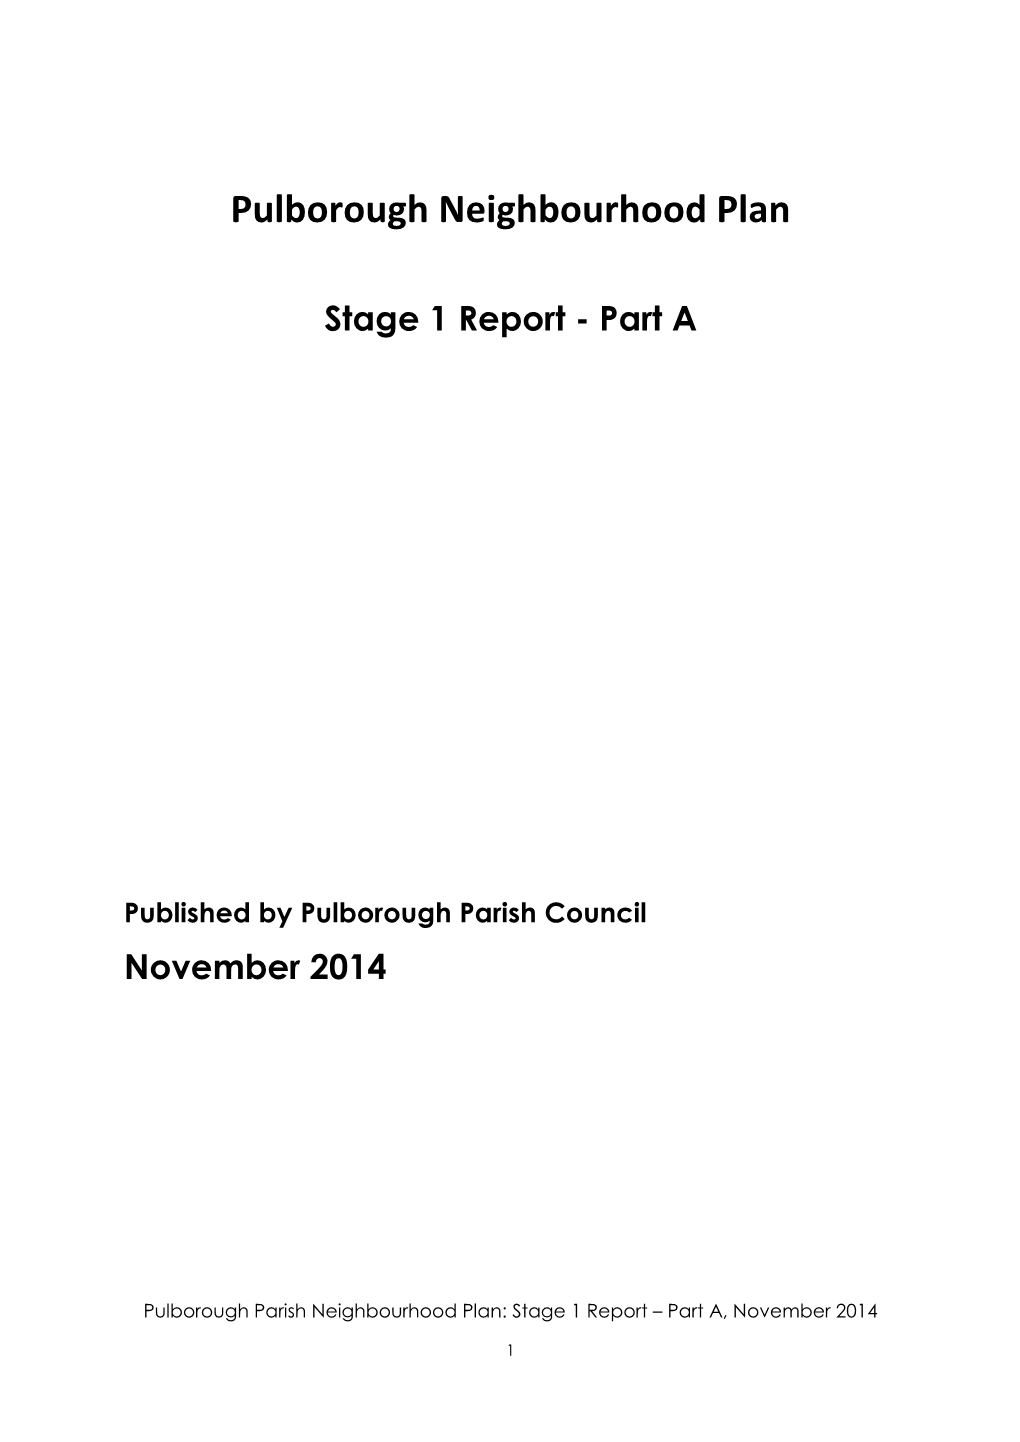 Stage 1 Report Part A